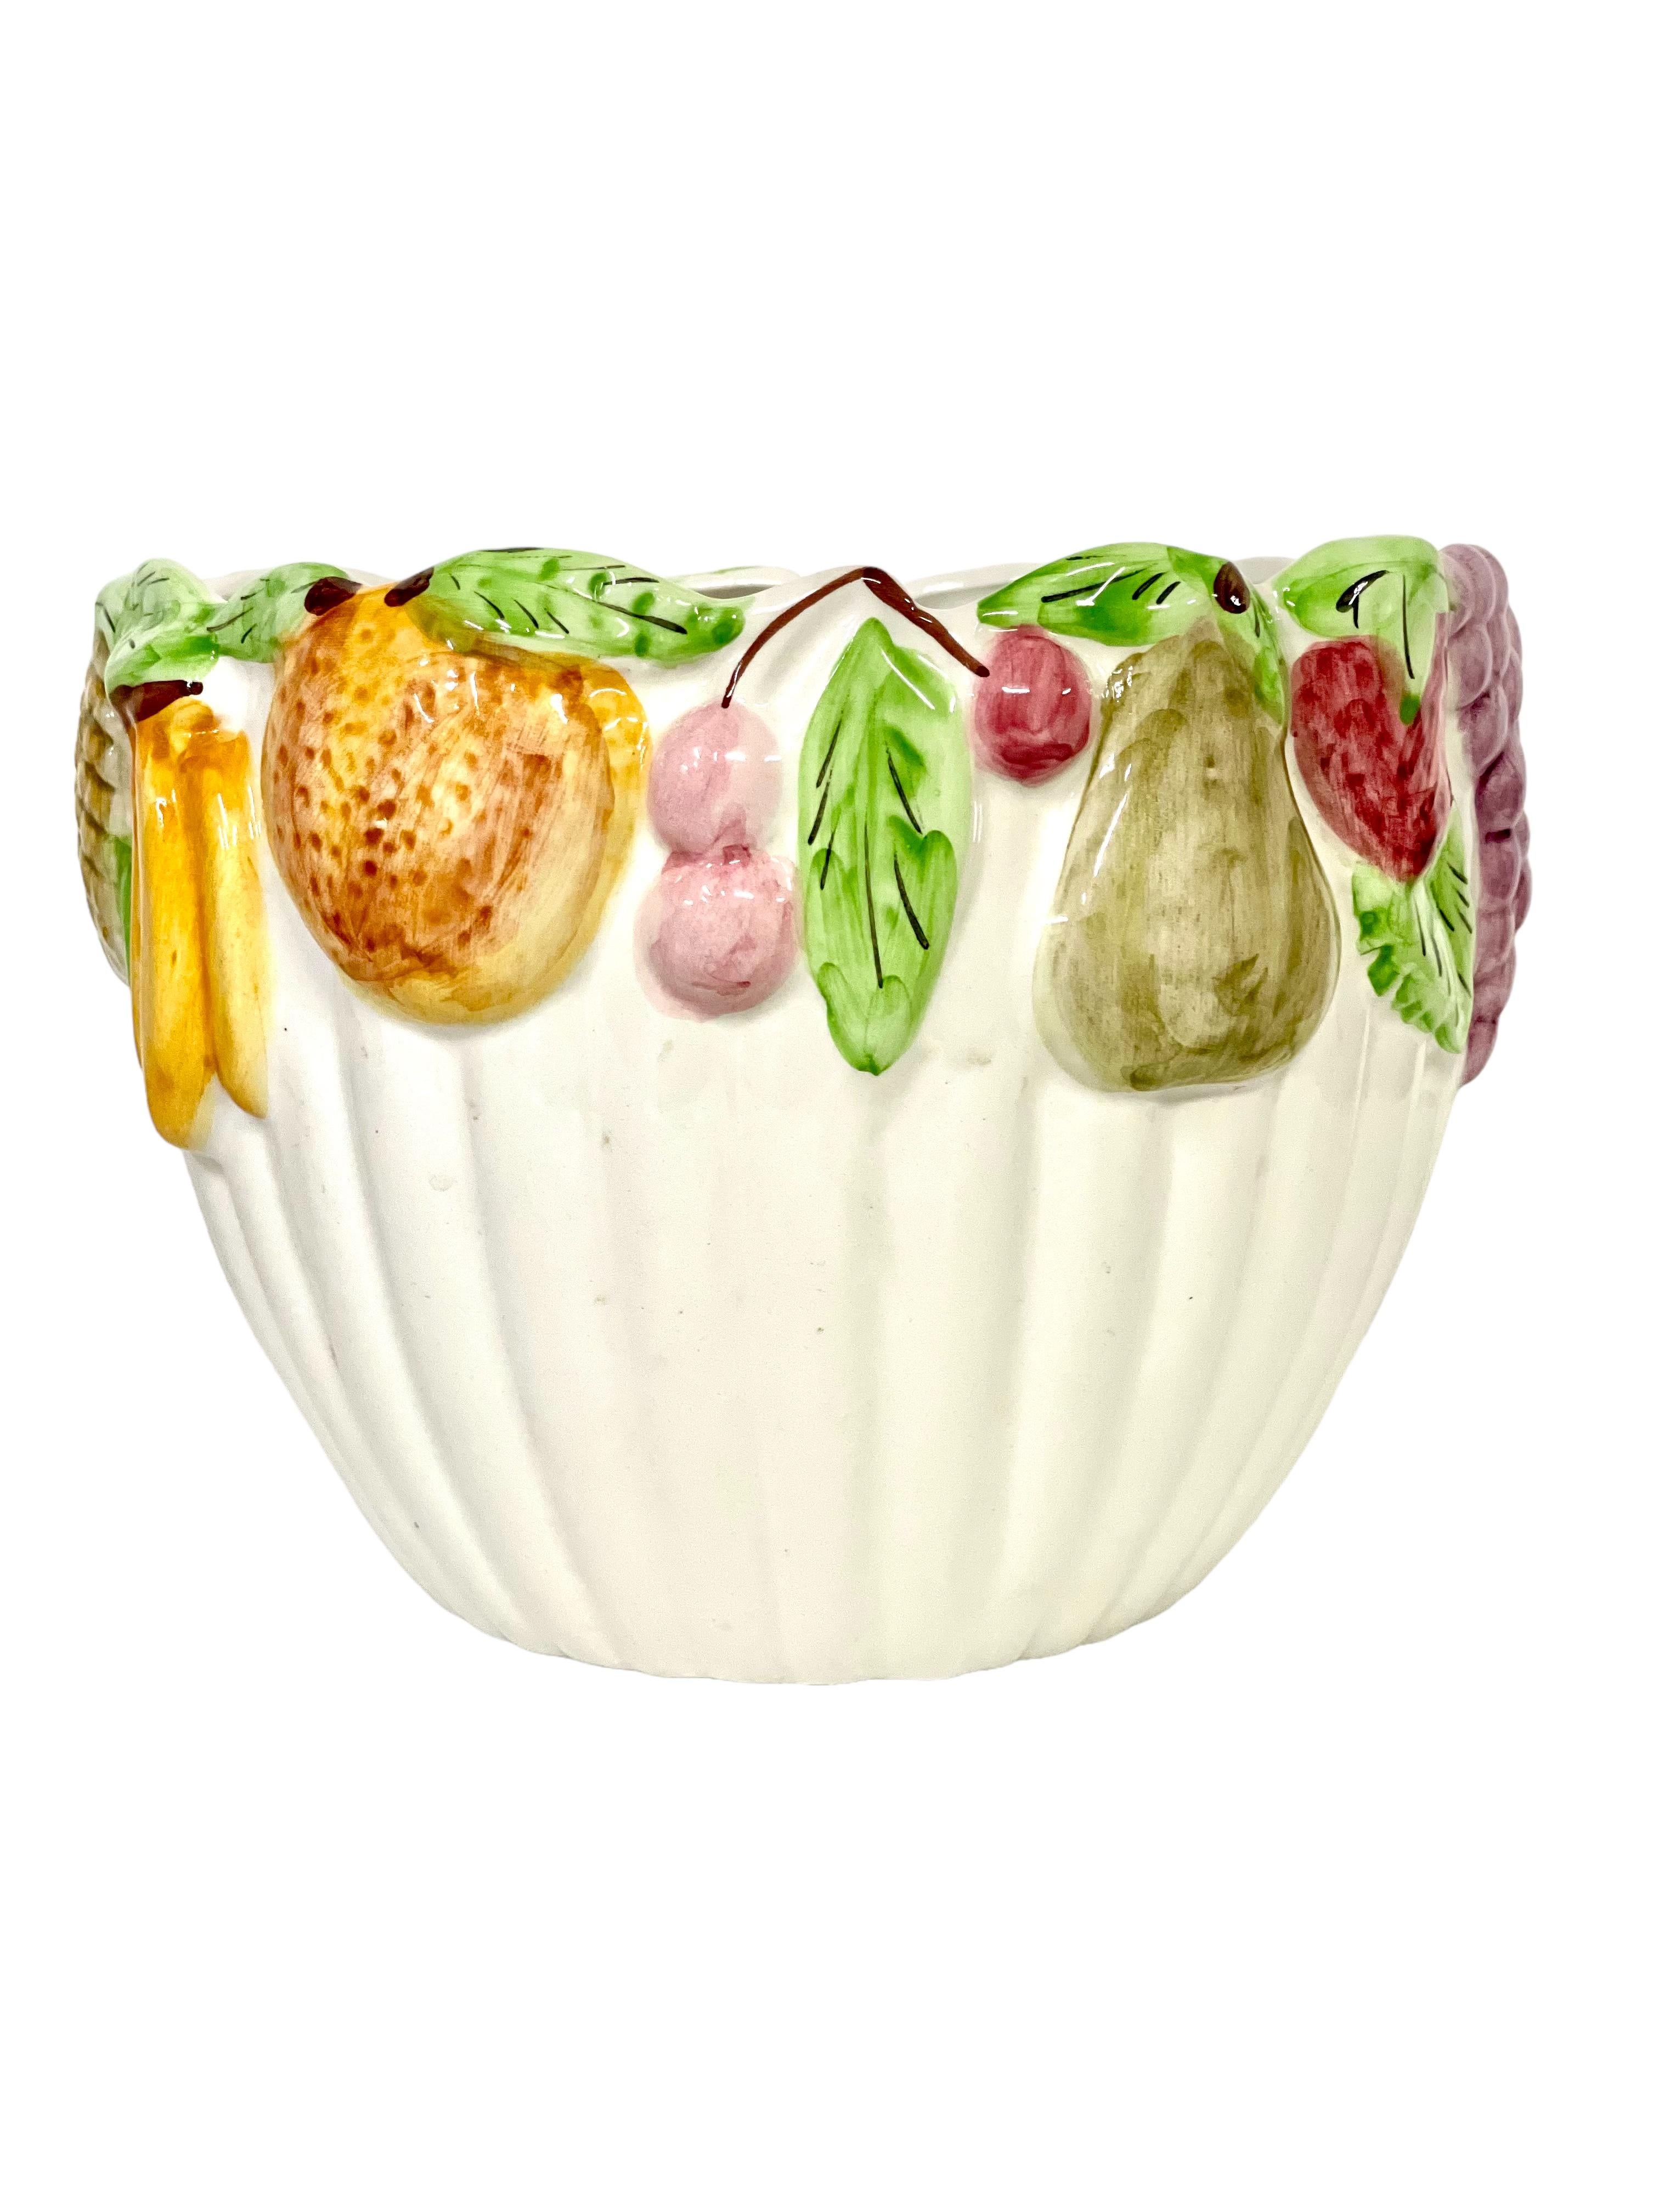 A quirky and very retro French Barbotine Majolica cache pot dating from the 19th century, and featuring an eye-catching design of succulent painted fruits encircling its rim. The pot itself is glazed creamy white inside and out, its curvaceous body